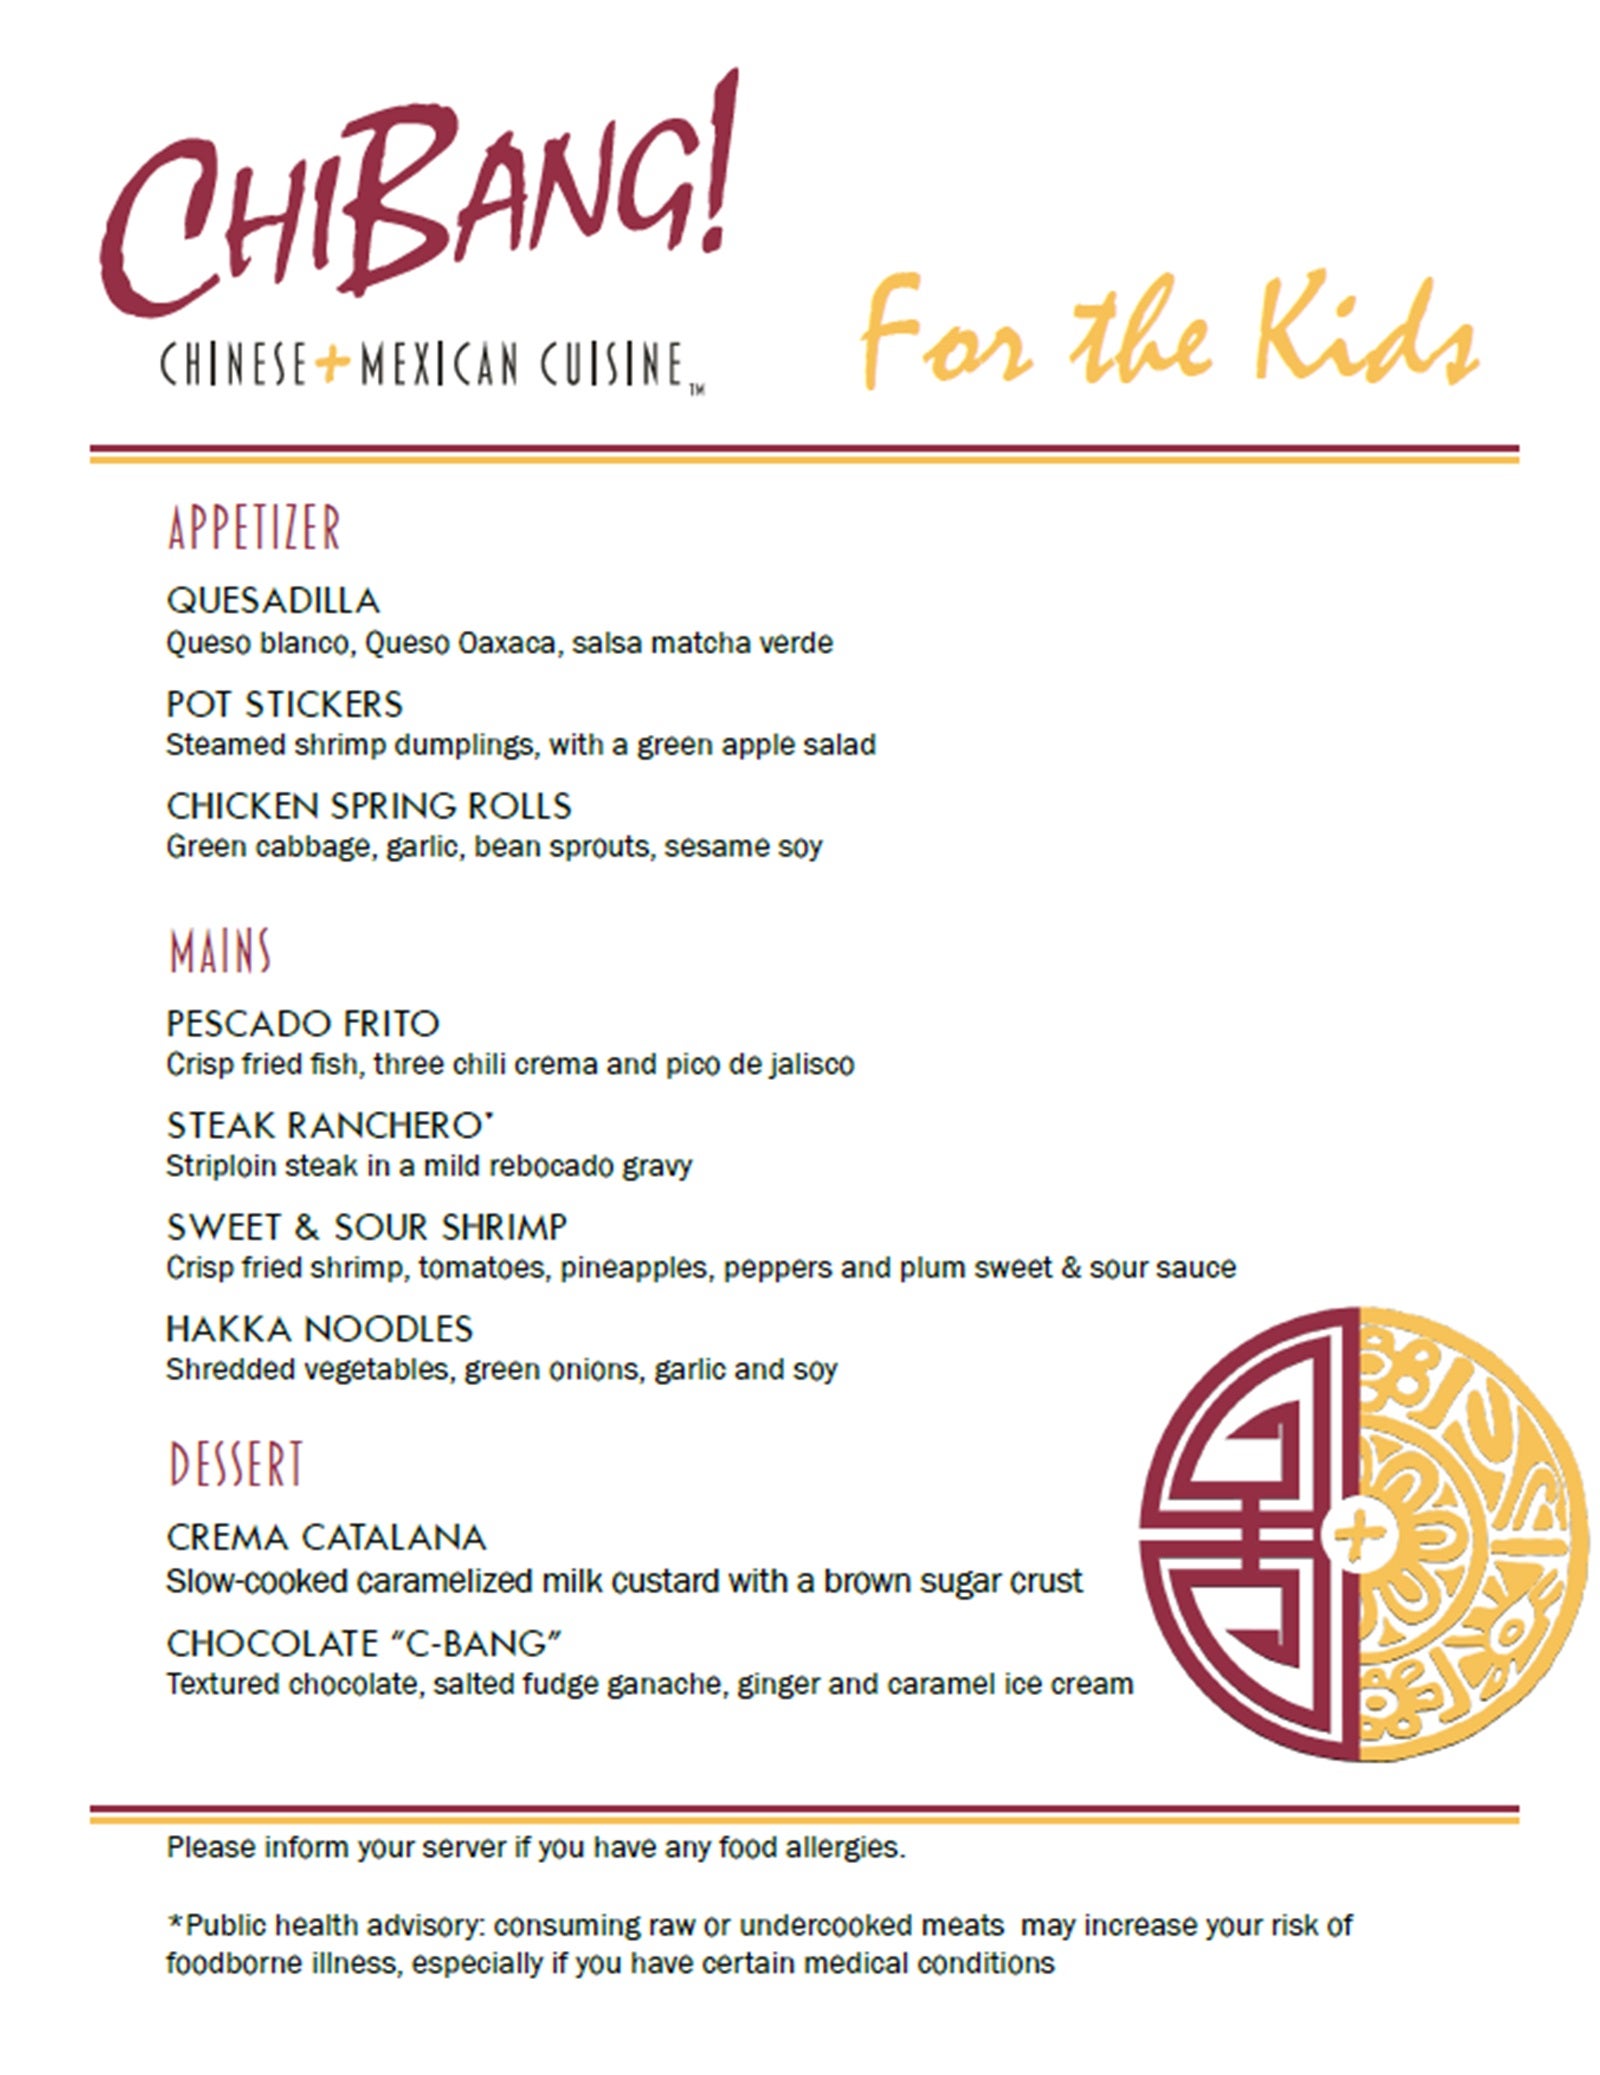 A children's menu from Carnival Cruise Line's Chibang! restaurant